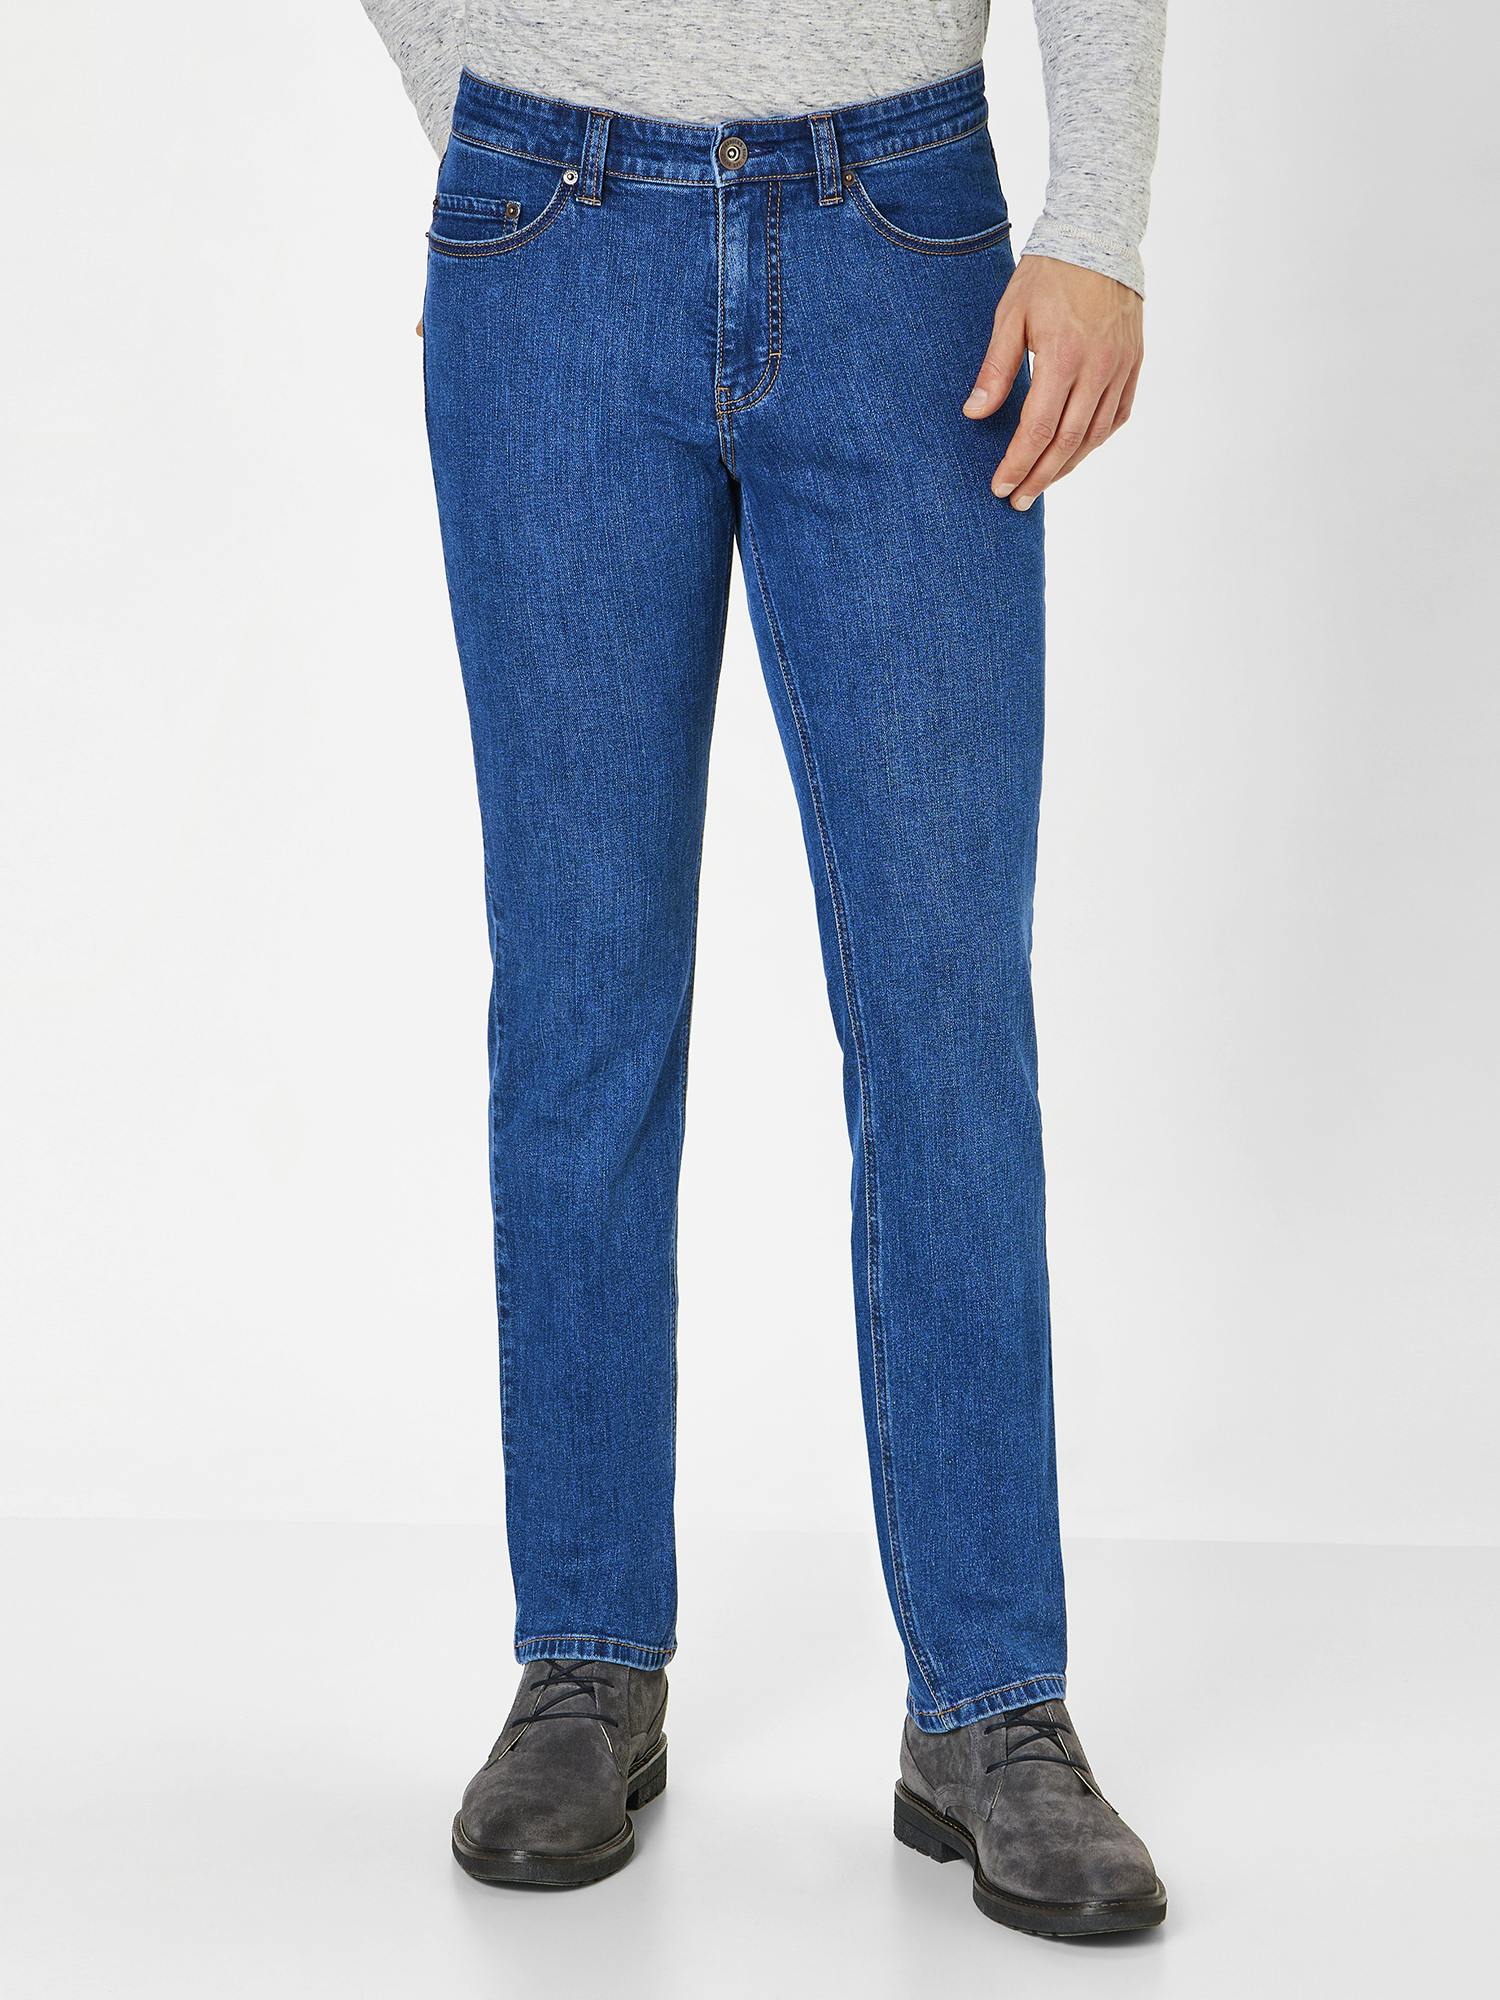 Image of Paddock&#039s Pipe Jeans Slim Fit deep blue moustache use